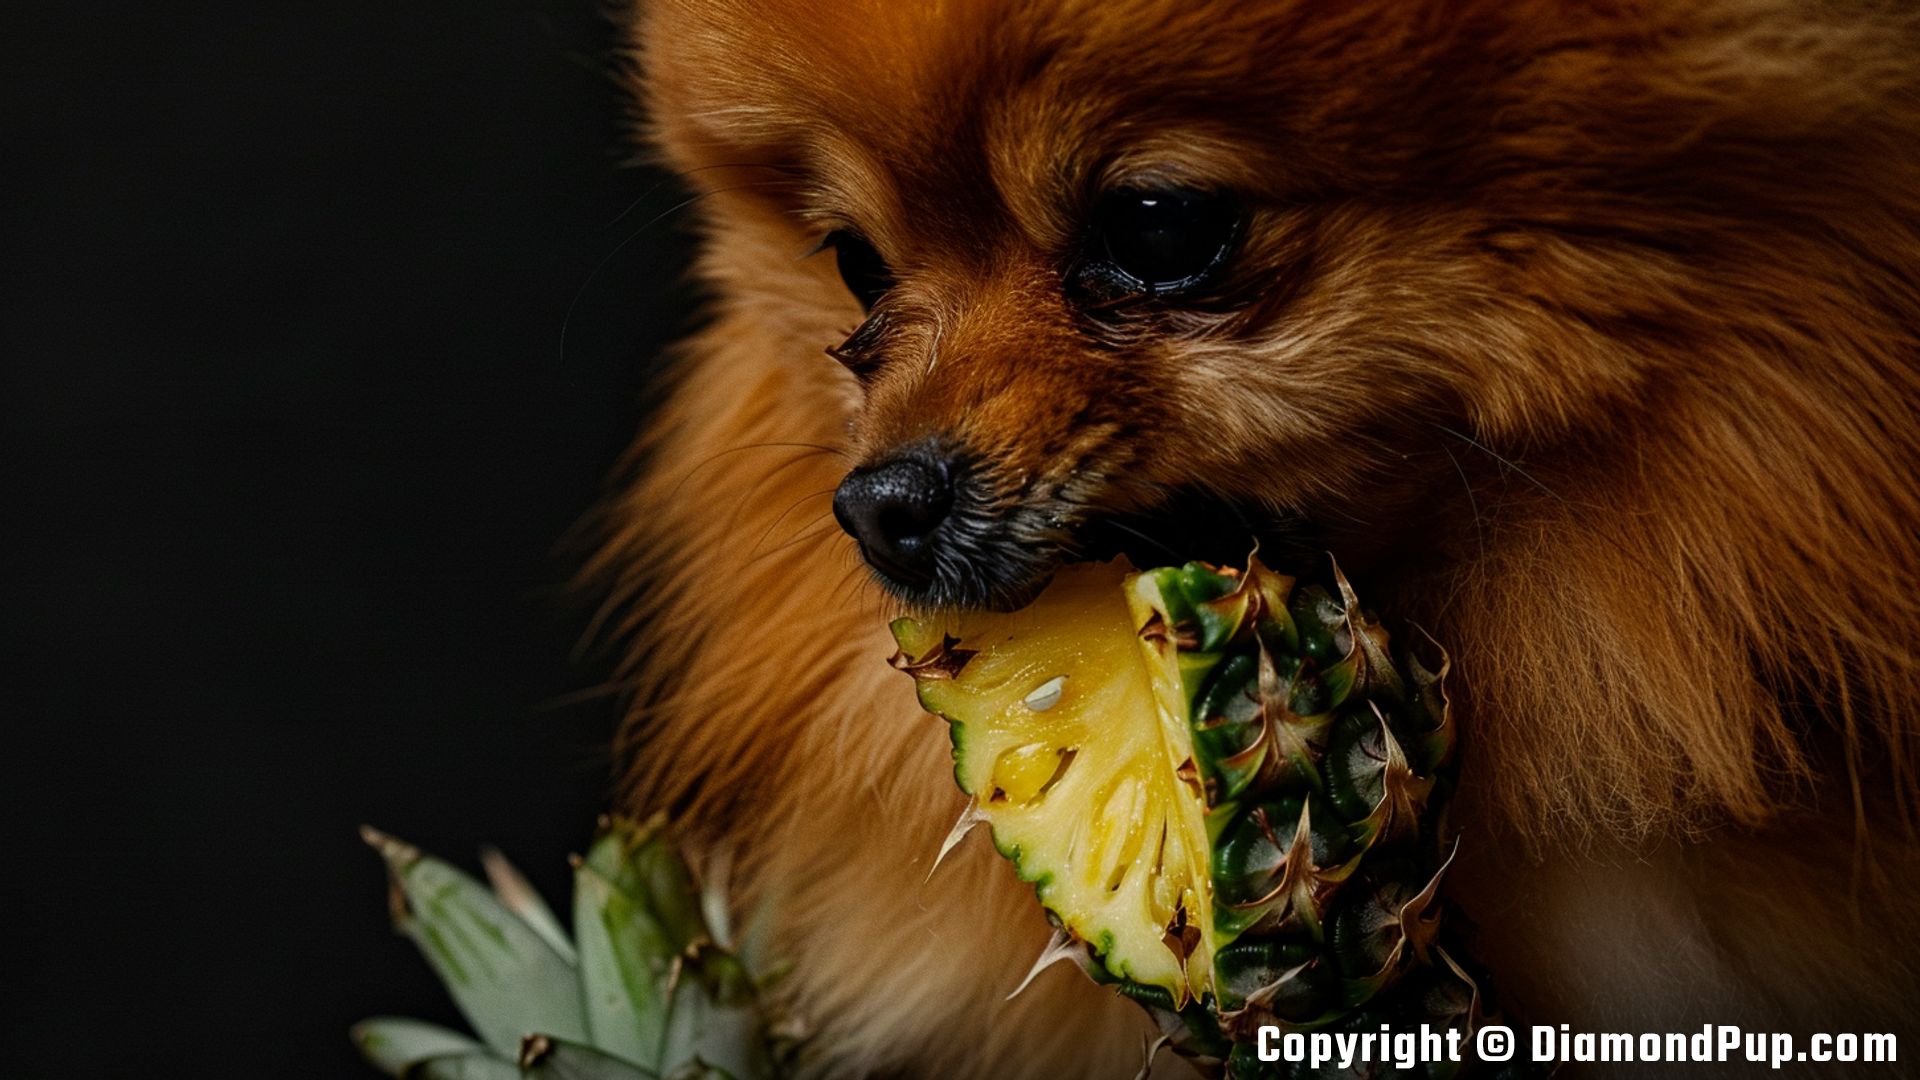 Photograph of Pomeranian Snacking on Pineapple